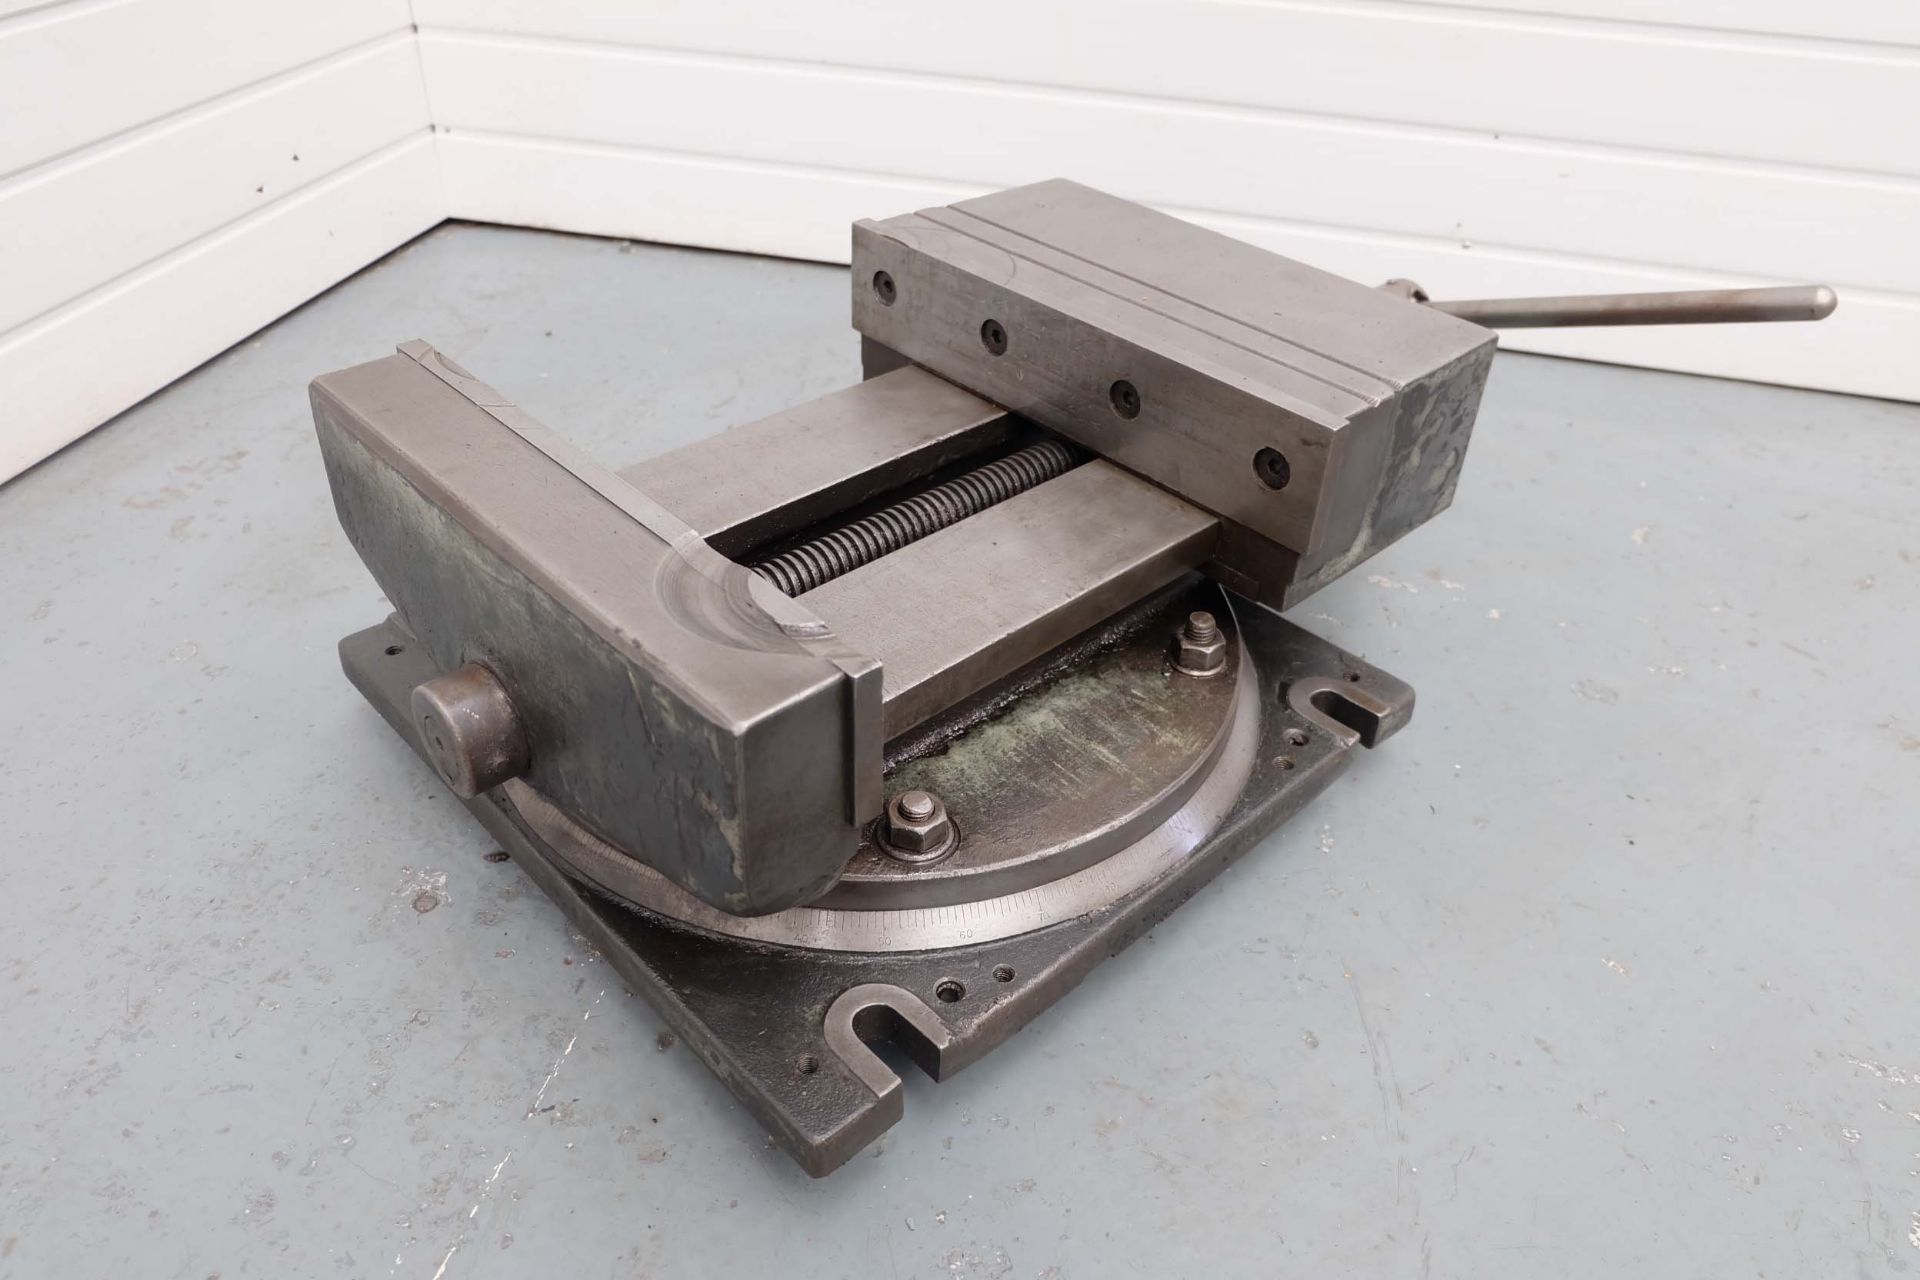 14" Swivelling Machine Vice. Width of Jaws 14". Height of Jaws 3". Max Opening 14". Clamping Slot Di - Image 2 of 8